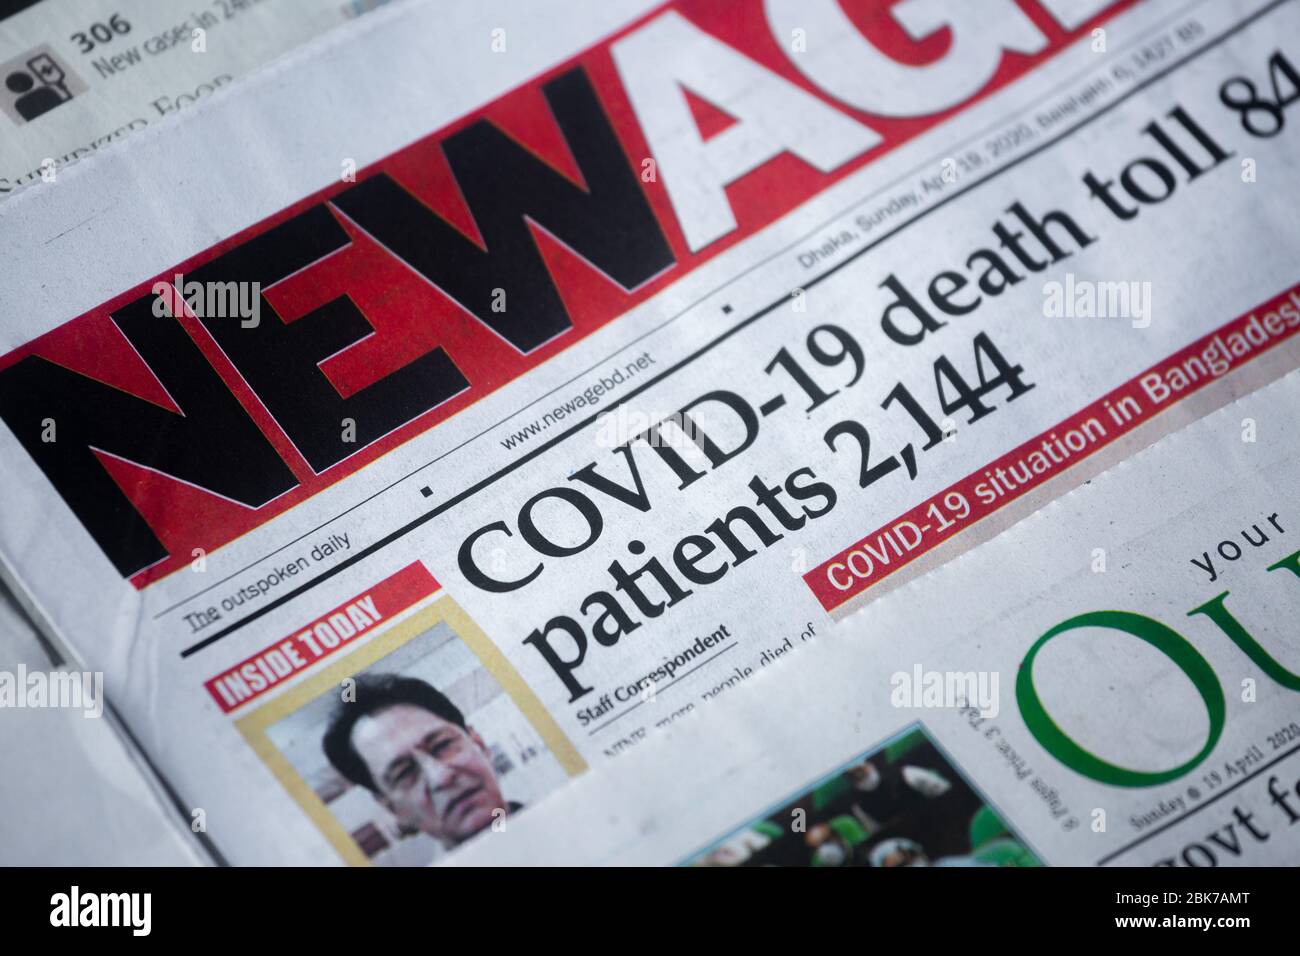 Today's headline of a popular English newspaper in Bangladesh is "COVID-19  death toll 84, Patients 2144 Stock Photo - Alamy